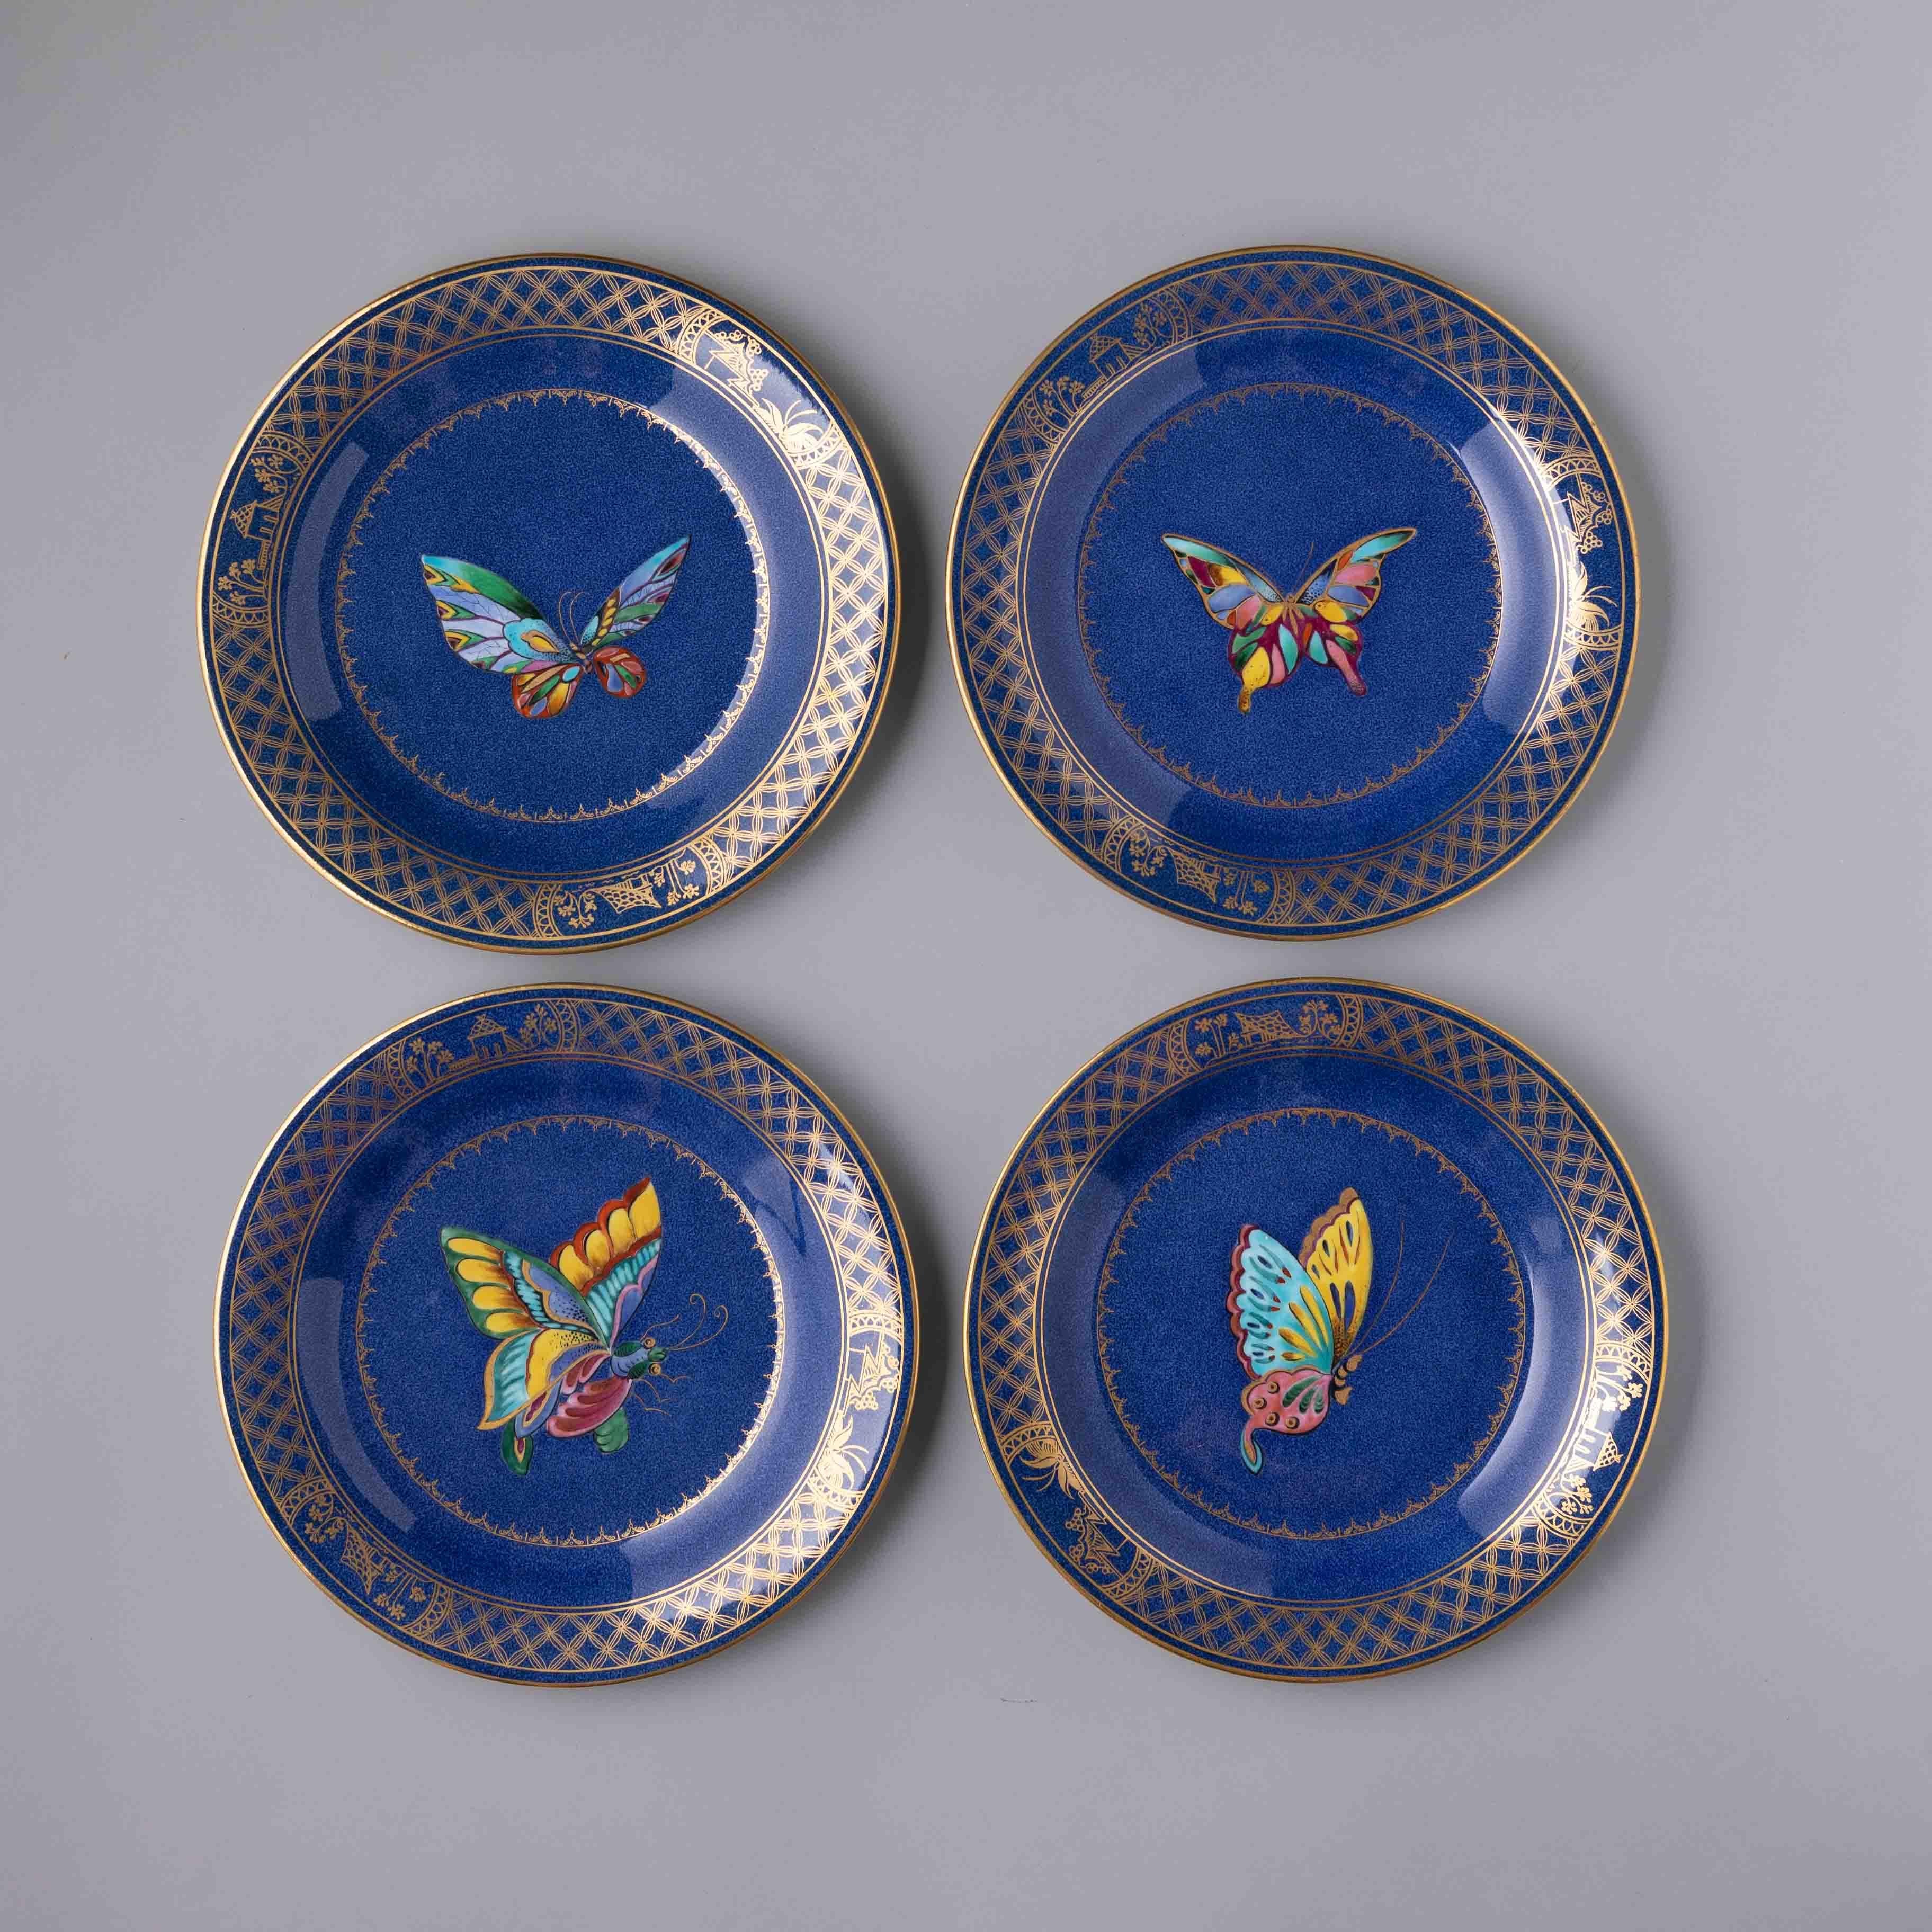 A set of 12 powder blue ‘Butterfly’ plates designed by Daisy Makeig-Jones for Wedgwood, circa 1920.

These whimsical plates are just gorgeous, featuring beautifully polychromed butterflies for a colorful adaptation of Daisy Makeig-Jones’s